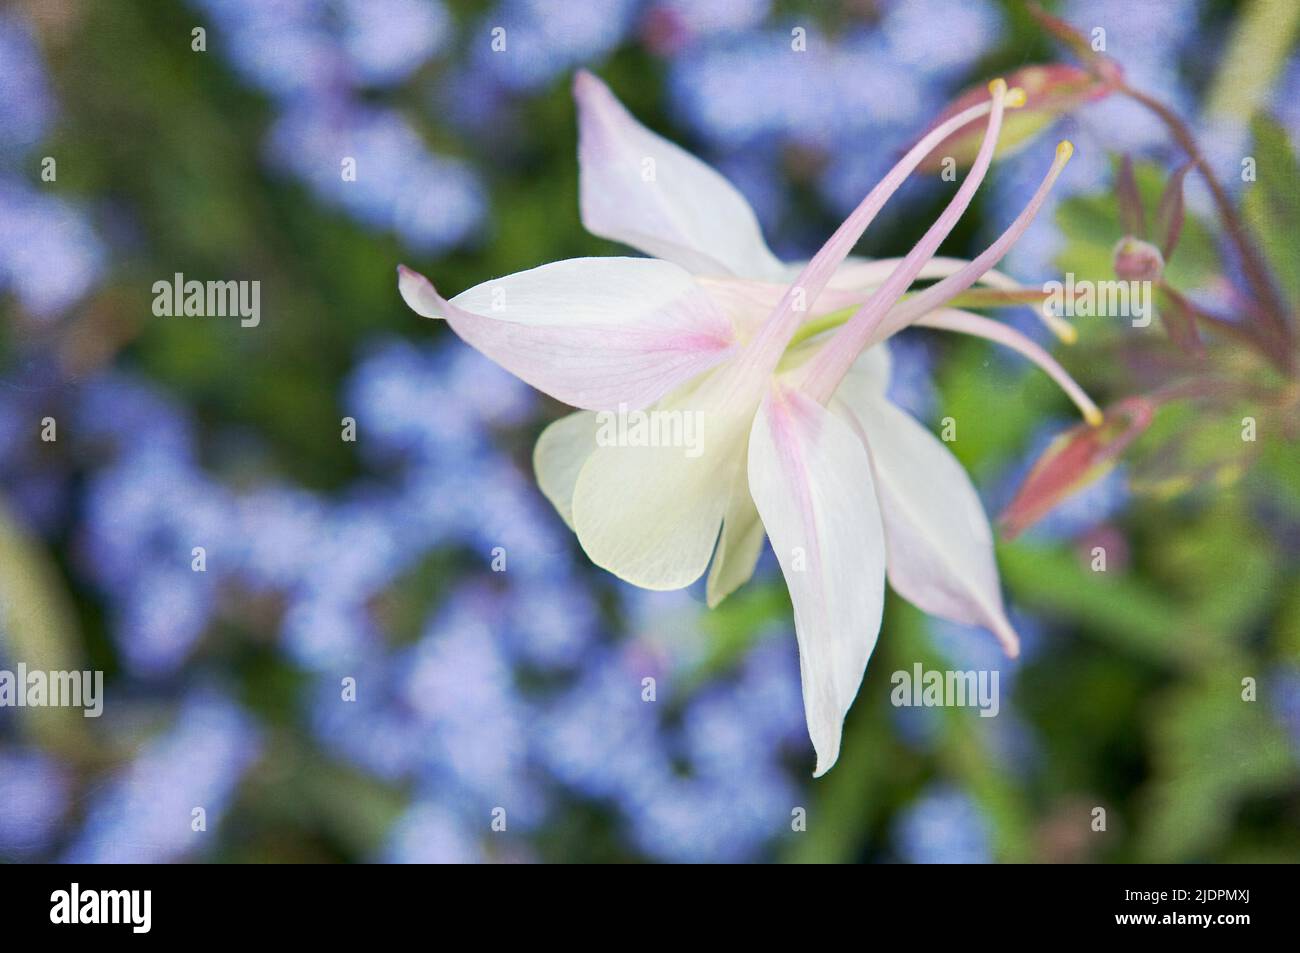 Delicate white and pink Columbine flower (Aquilegia) against a backdrop of blue forget-me-nots in a summer garden. Stock Photo